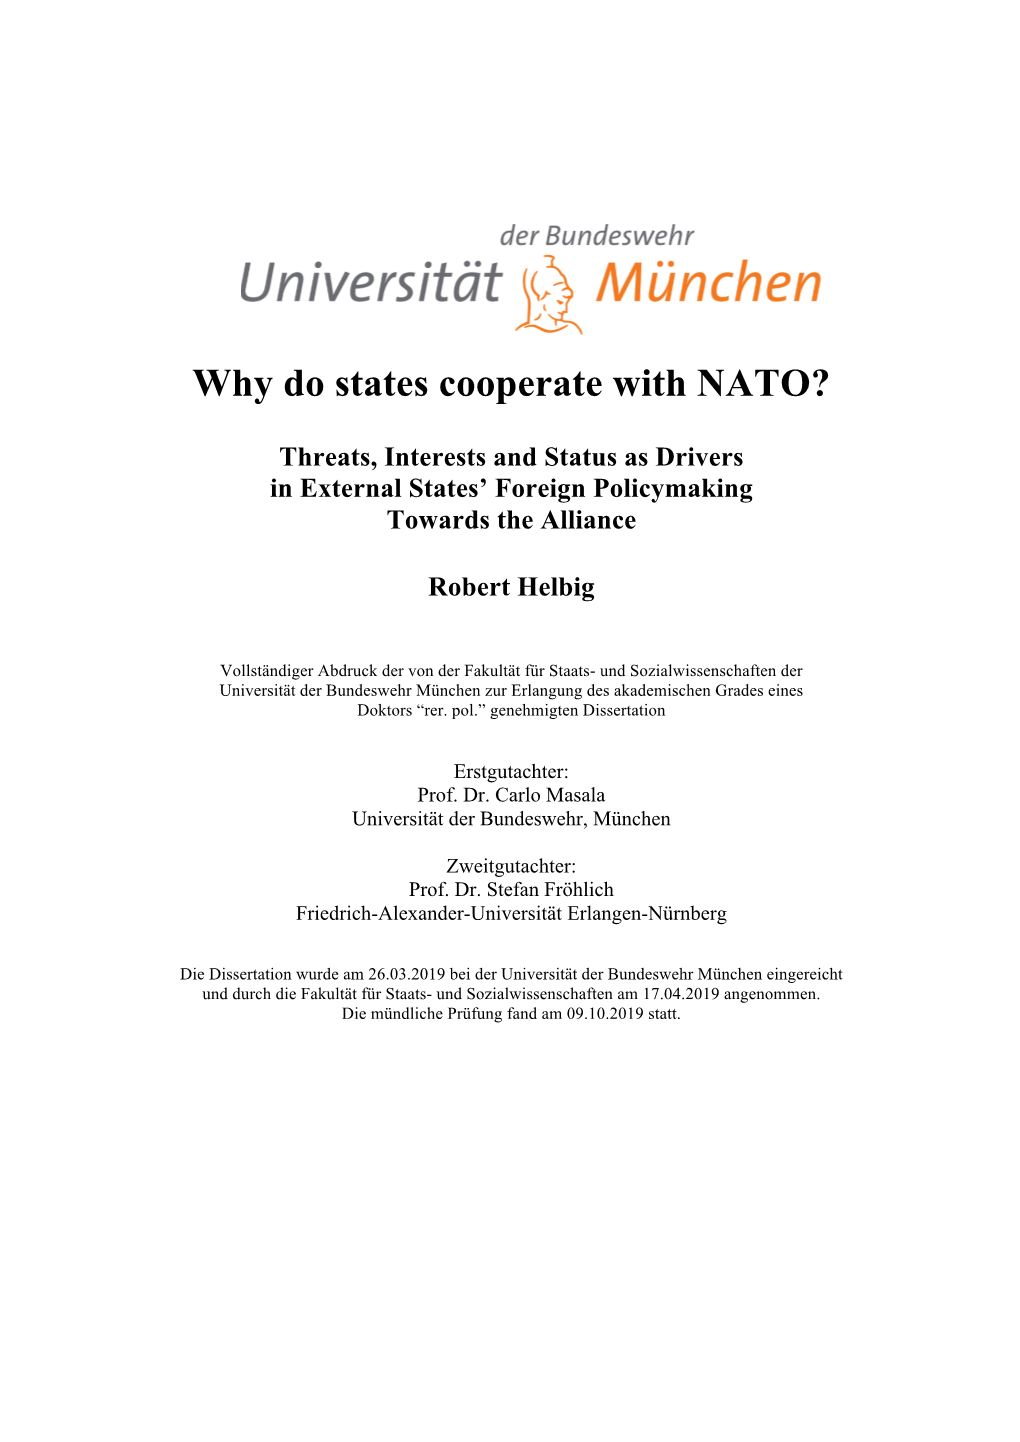 Why Do States Cooperate with NATO?